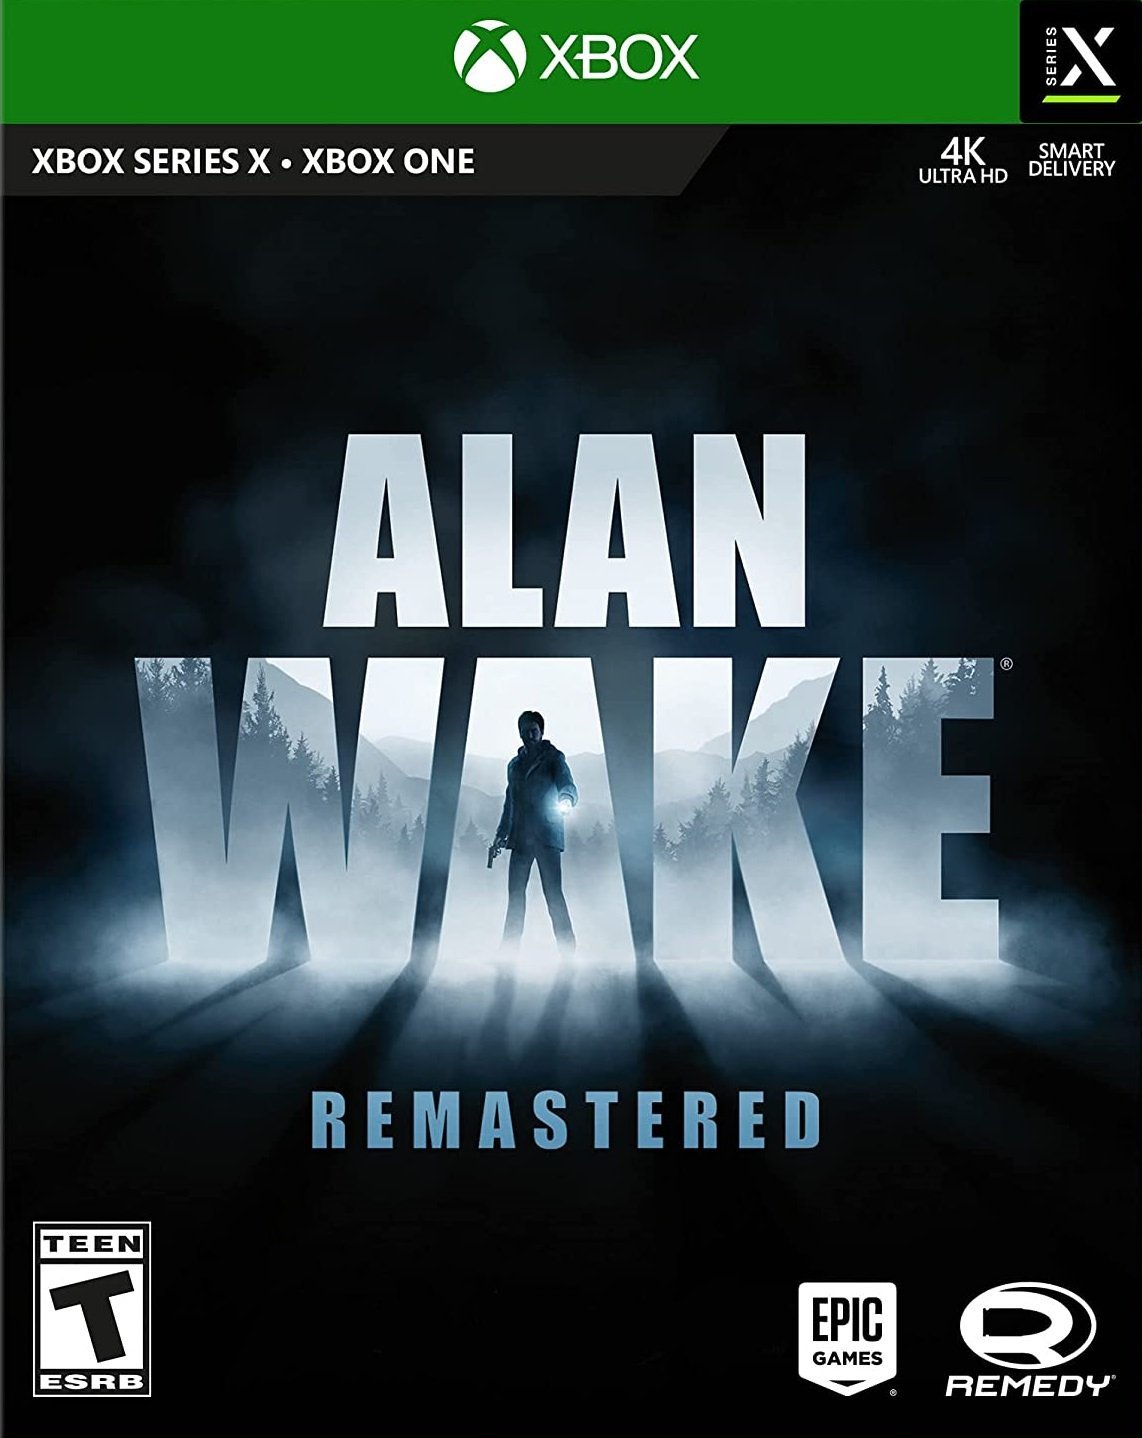 ALAN WAKE REMASTERED XBOX ONE X|S - Easy Video Game